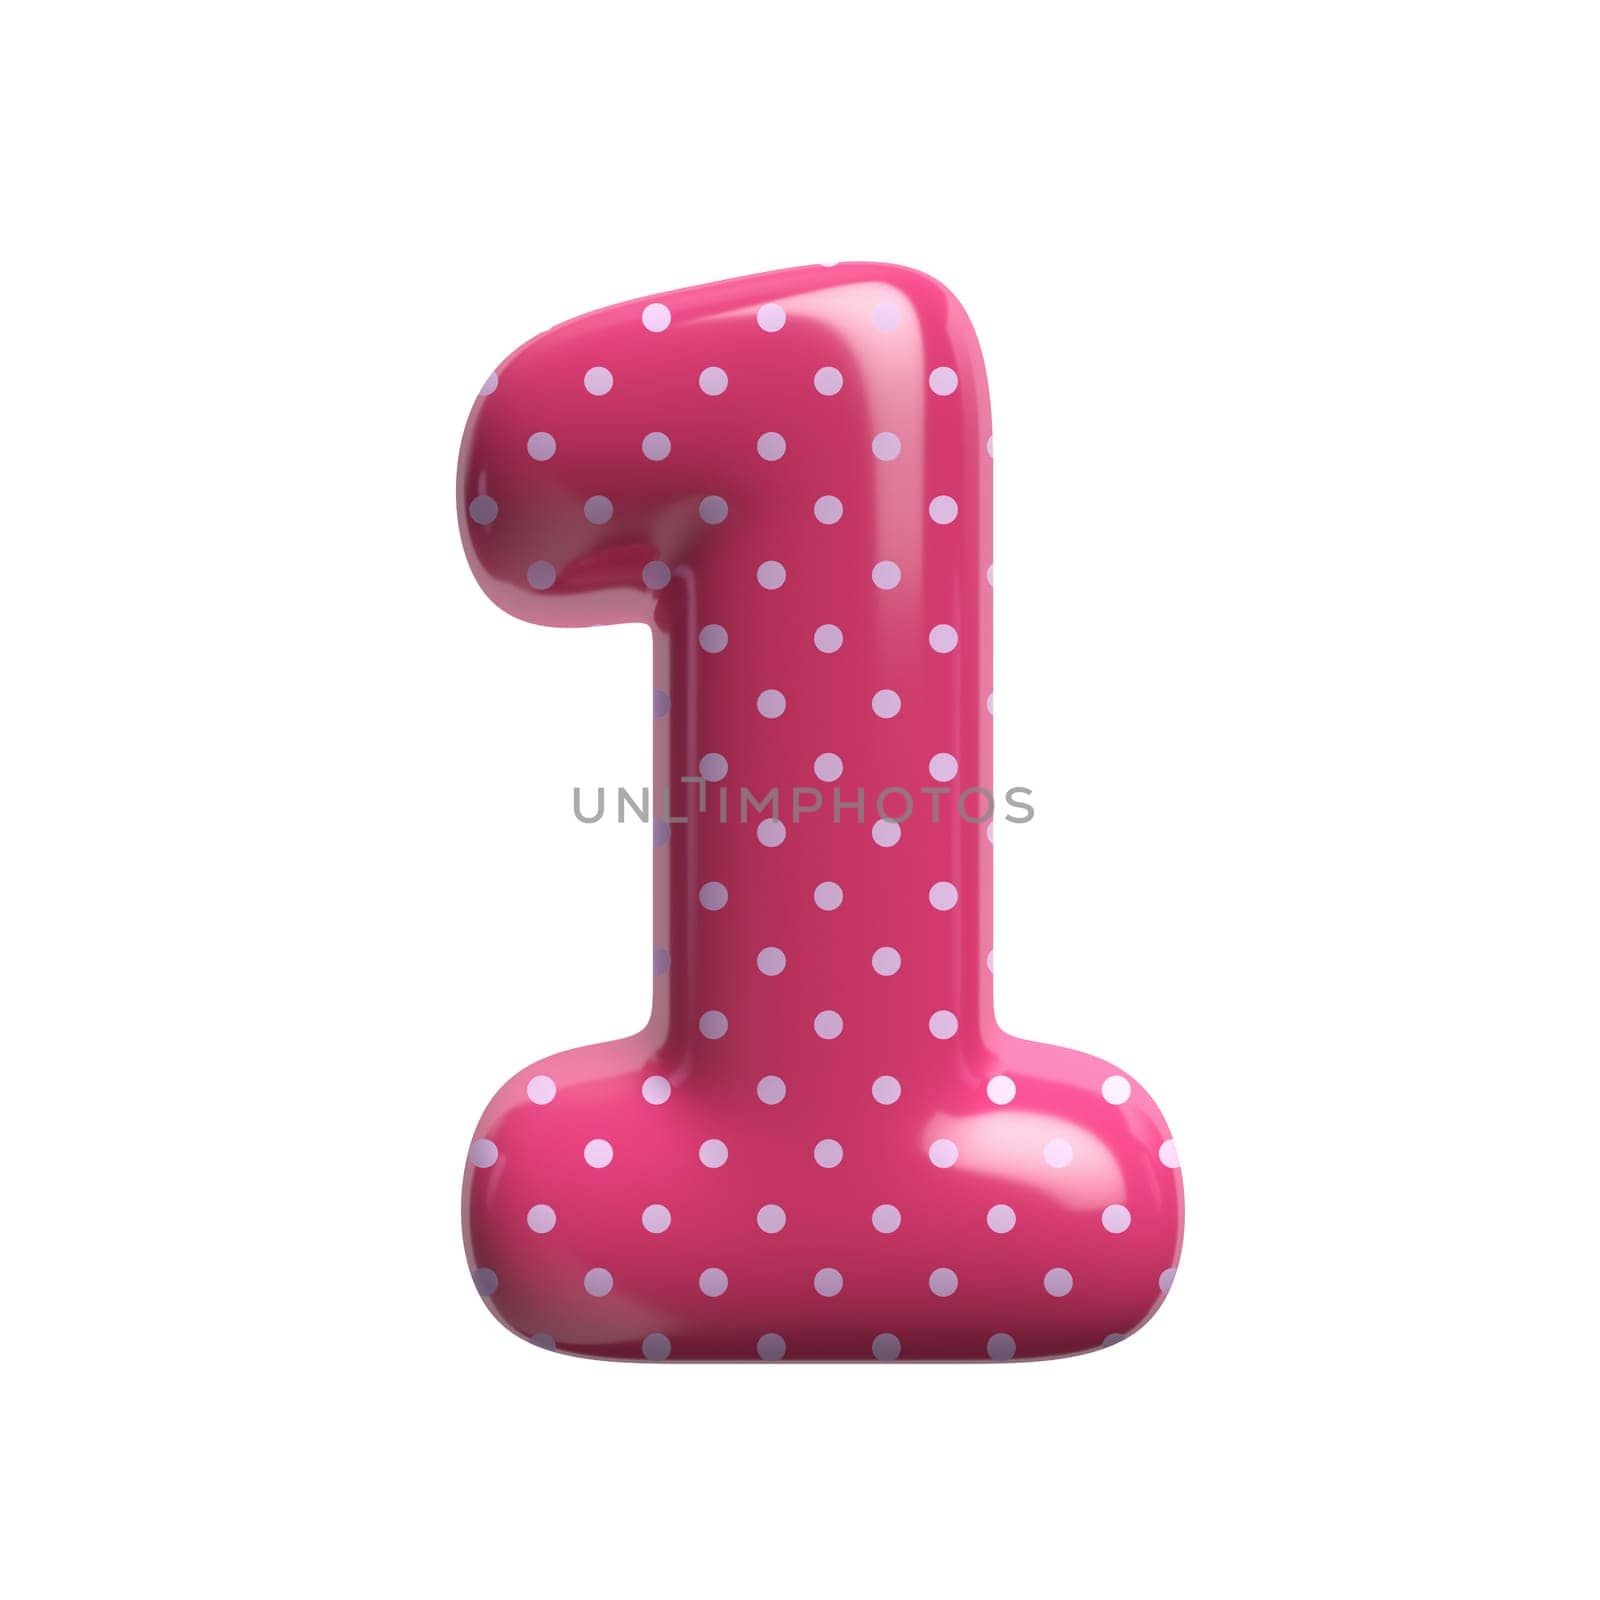 Polka dot number 1 - 3d pink retro digit isolated on white background. This alphabet is perfect for creative illustrations related but not limited to Fashion, retro design, decoration...